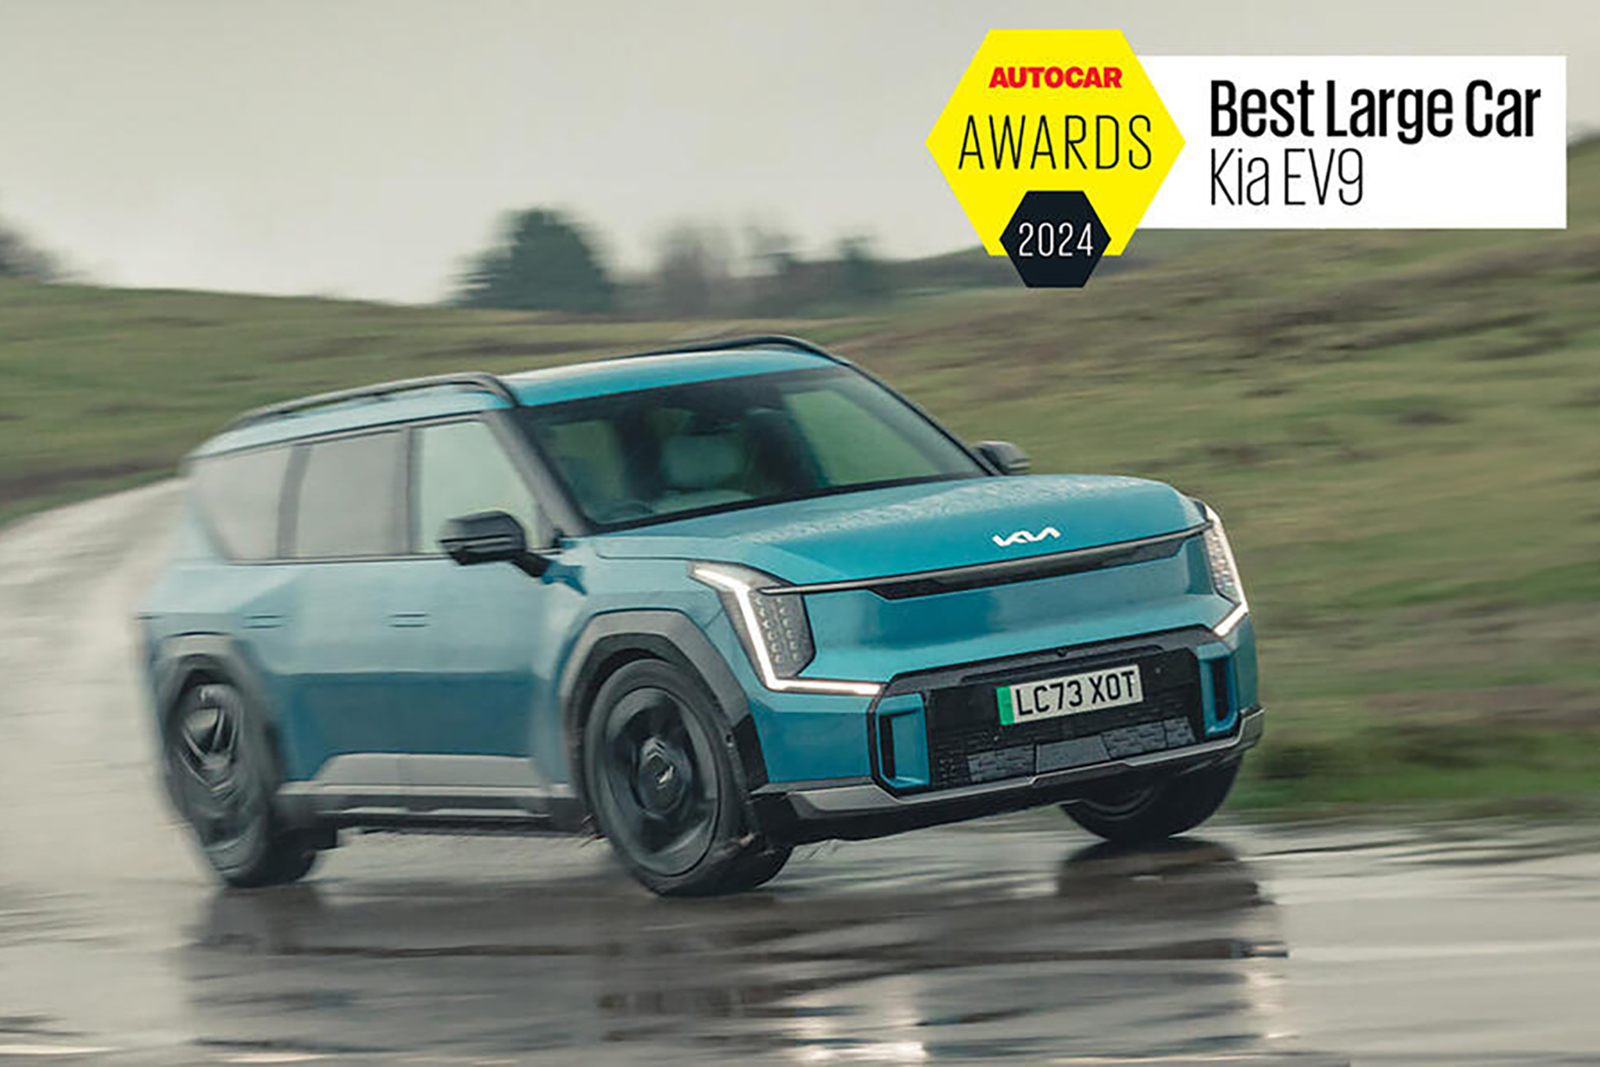 https://www.autocar.co.uk/Best%20electric%20cars%20for%20towing%20Kia%20EV9